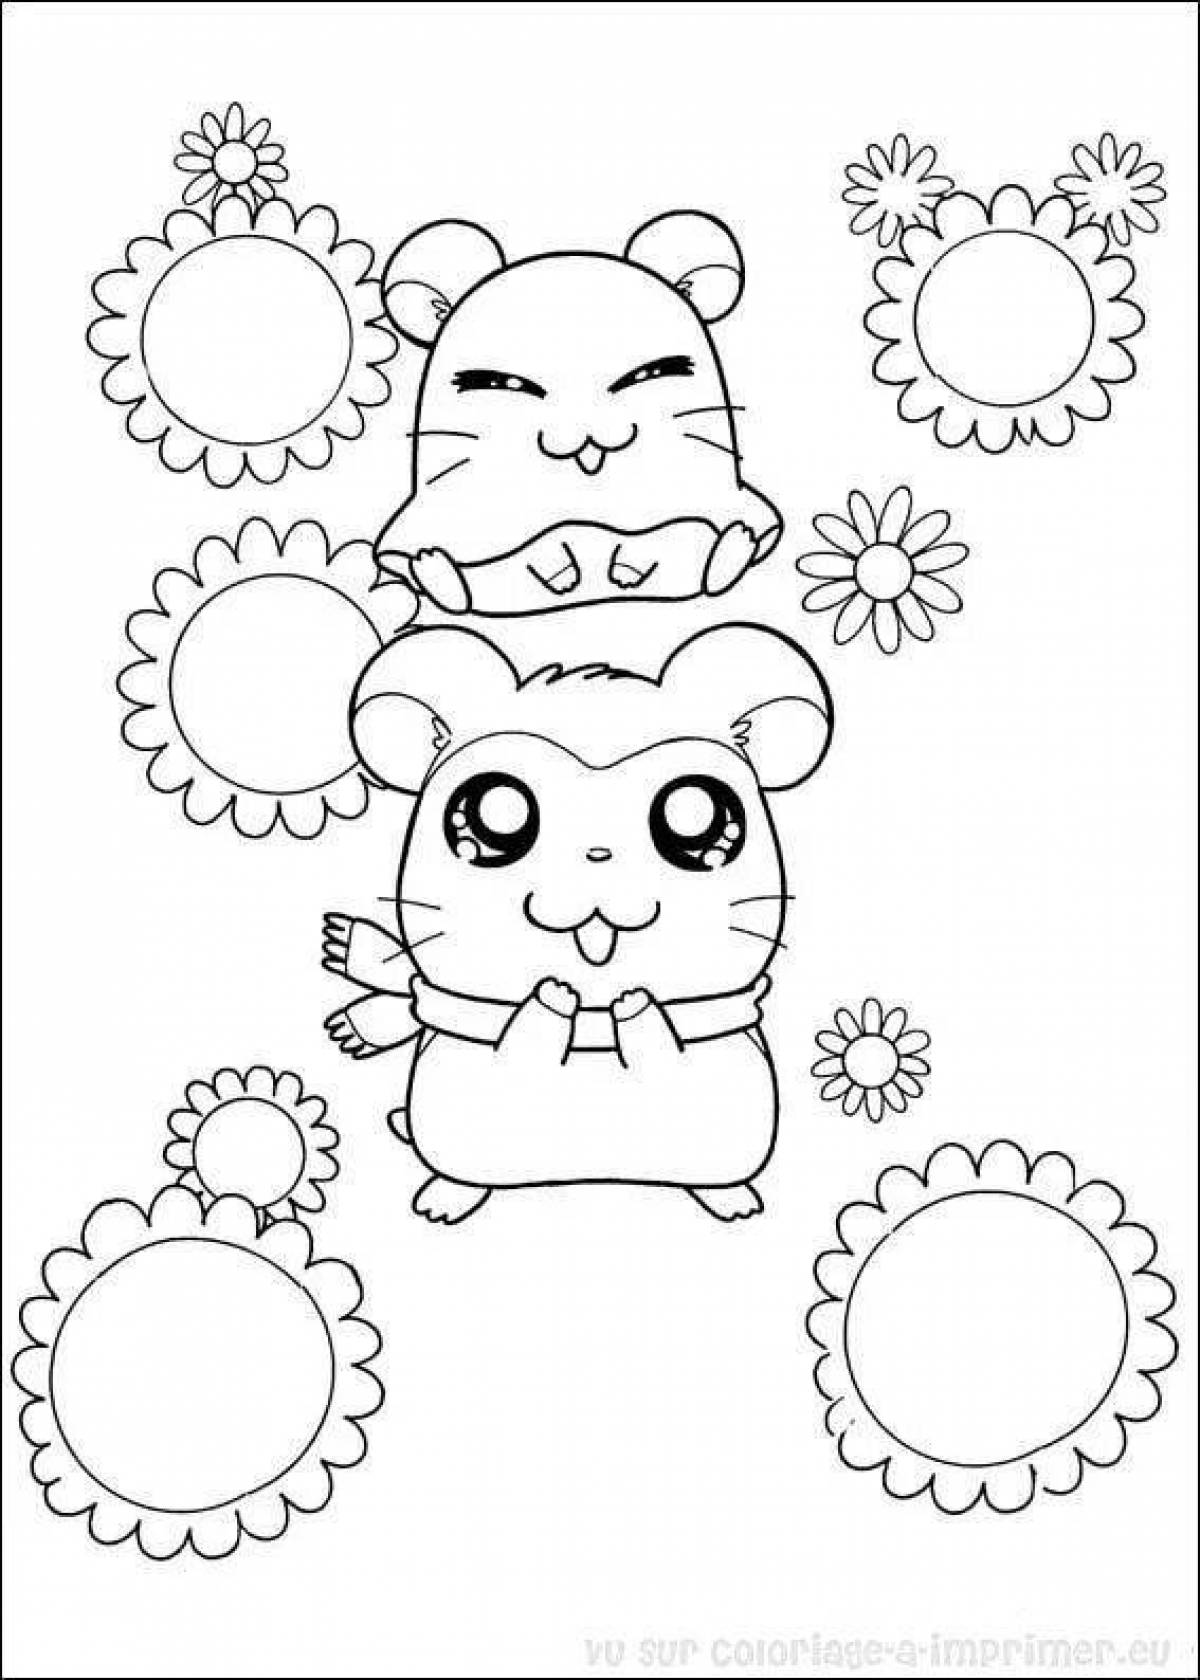 Fun coloring pages with hamsters